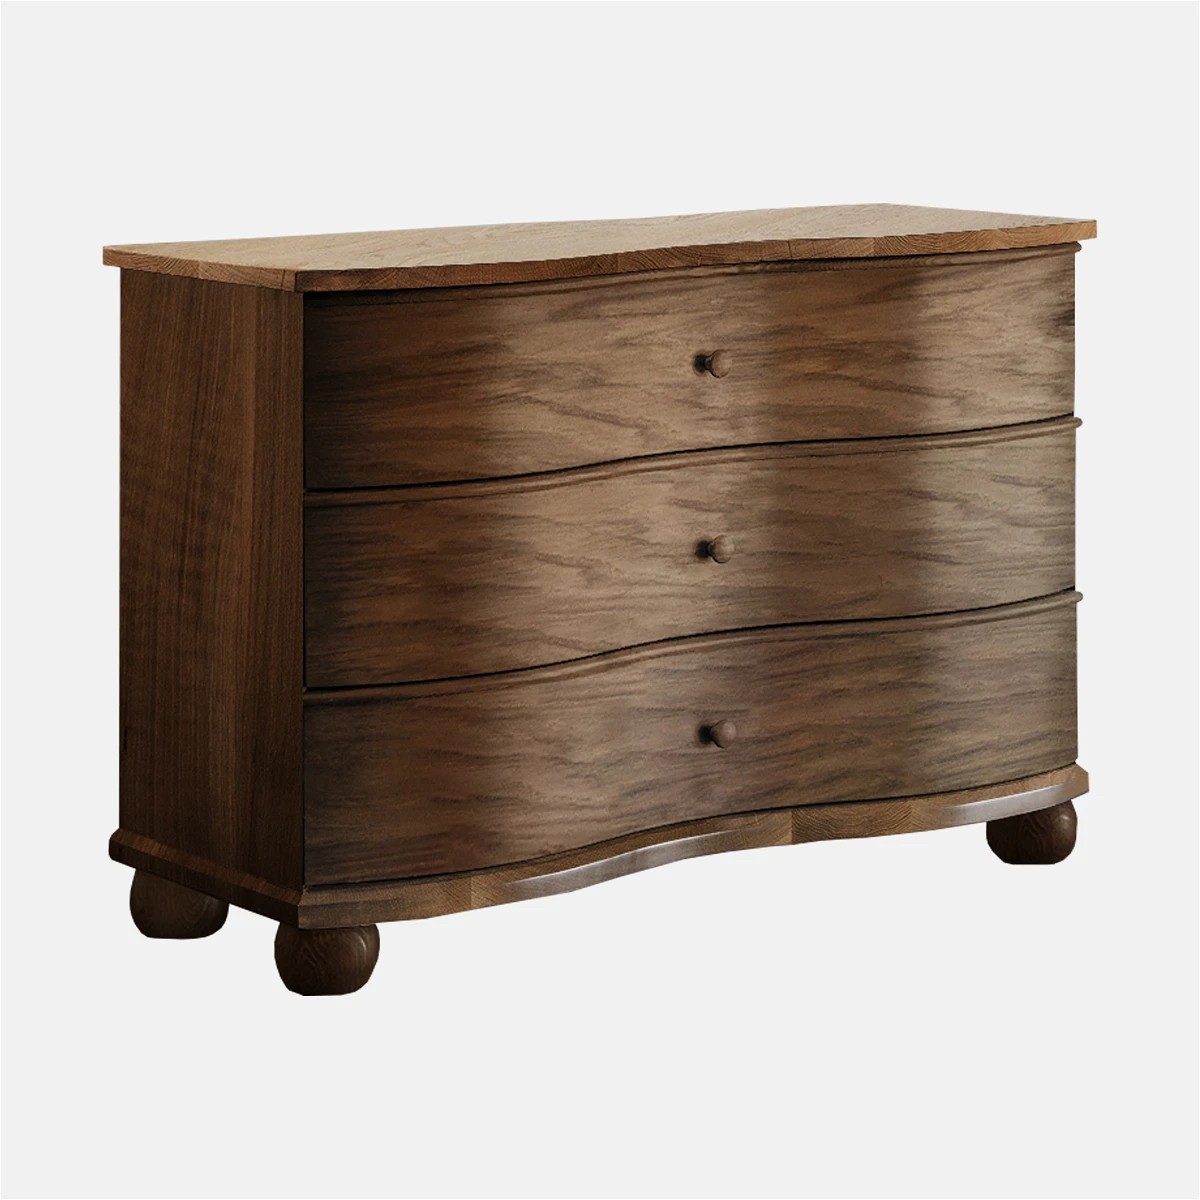 The image of an Meyer Dresser product